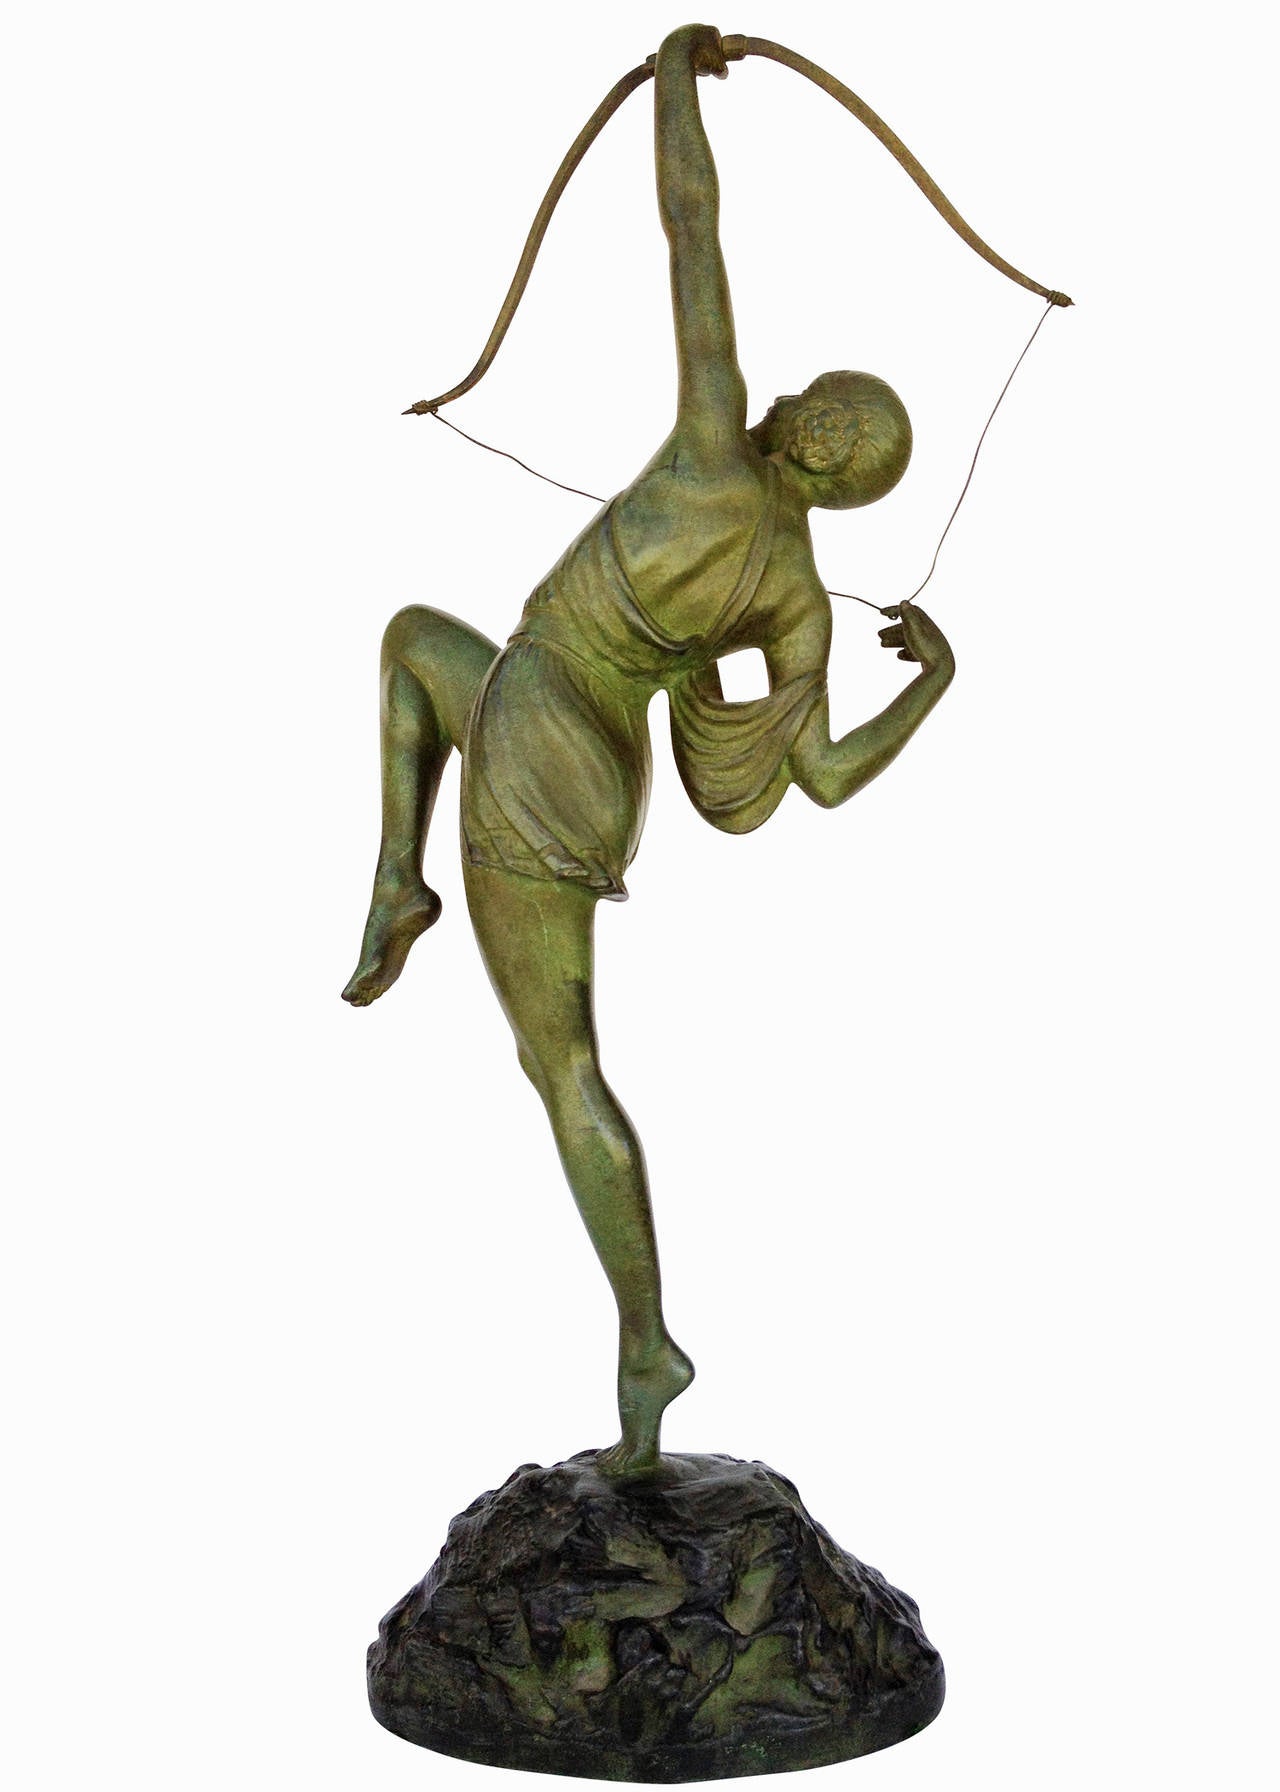 Designed by French sculptor Pierre Le Faguays, circa 1925, this Art Deco bronze statue features a young Grecian female archer named 